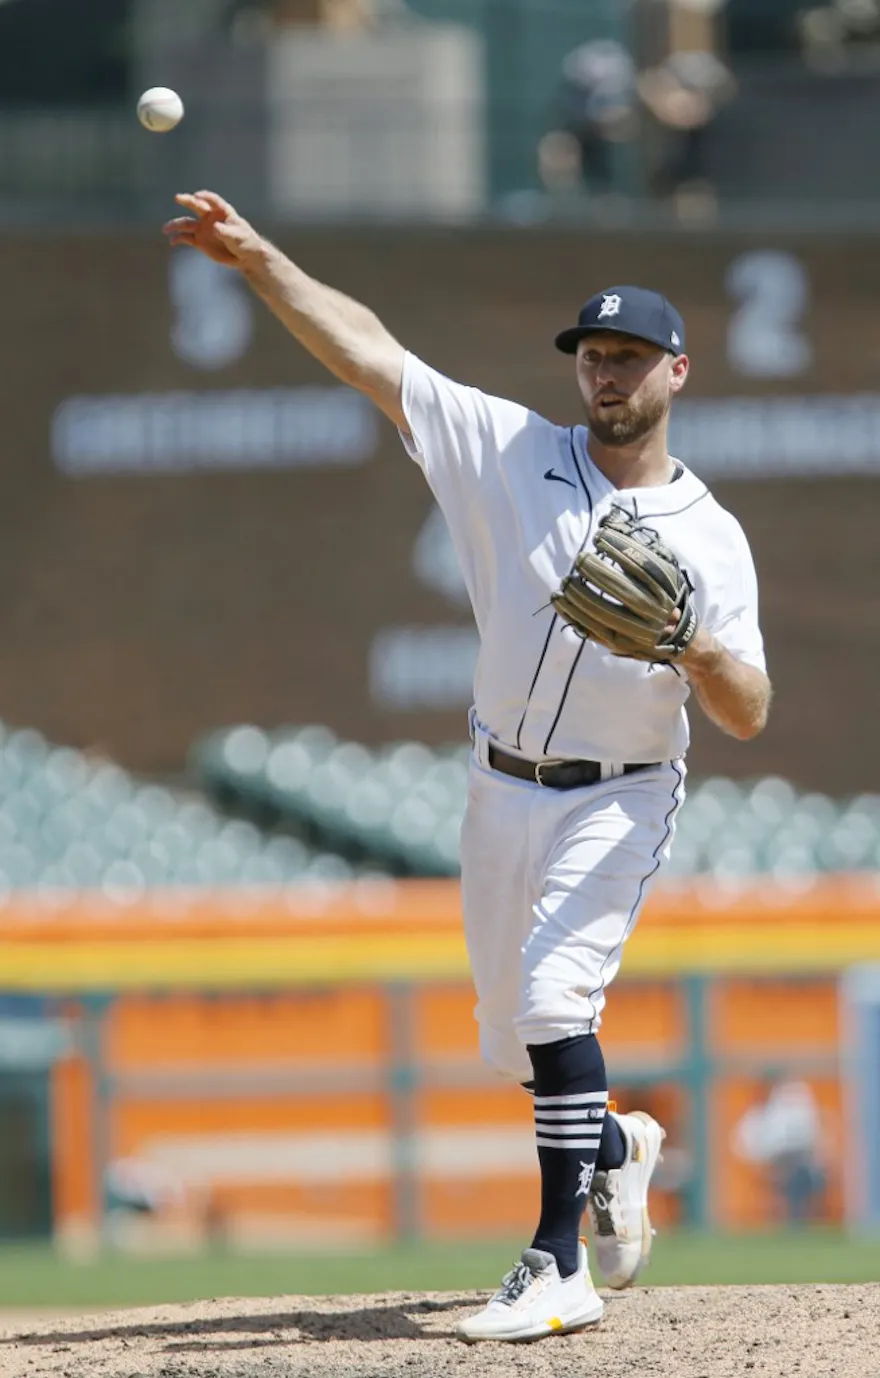 Roger Clemens excited for son Kody's MLB debut with Tigers